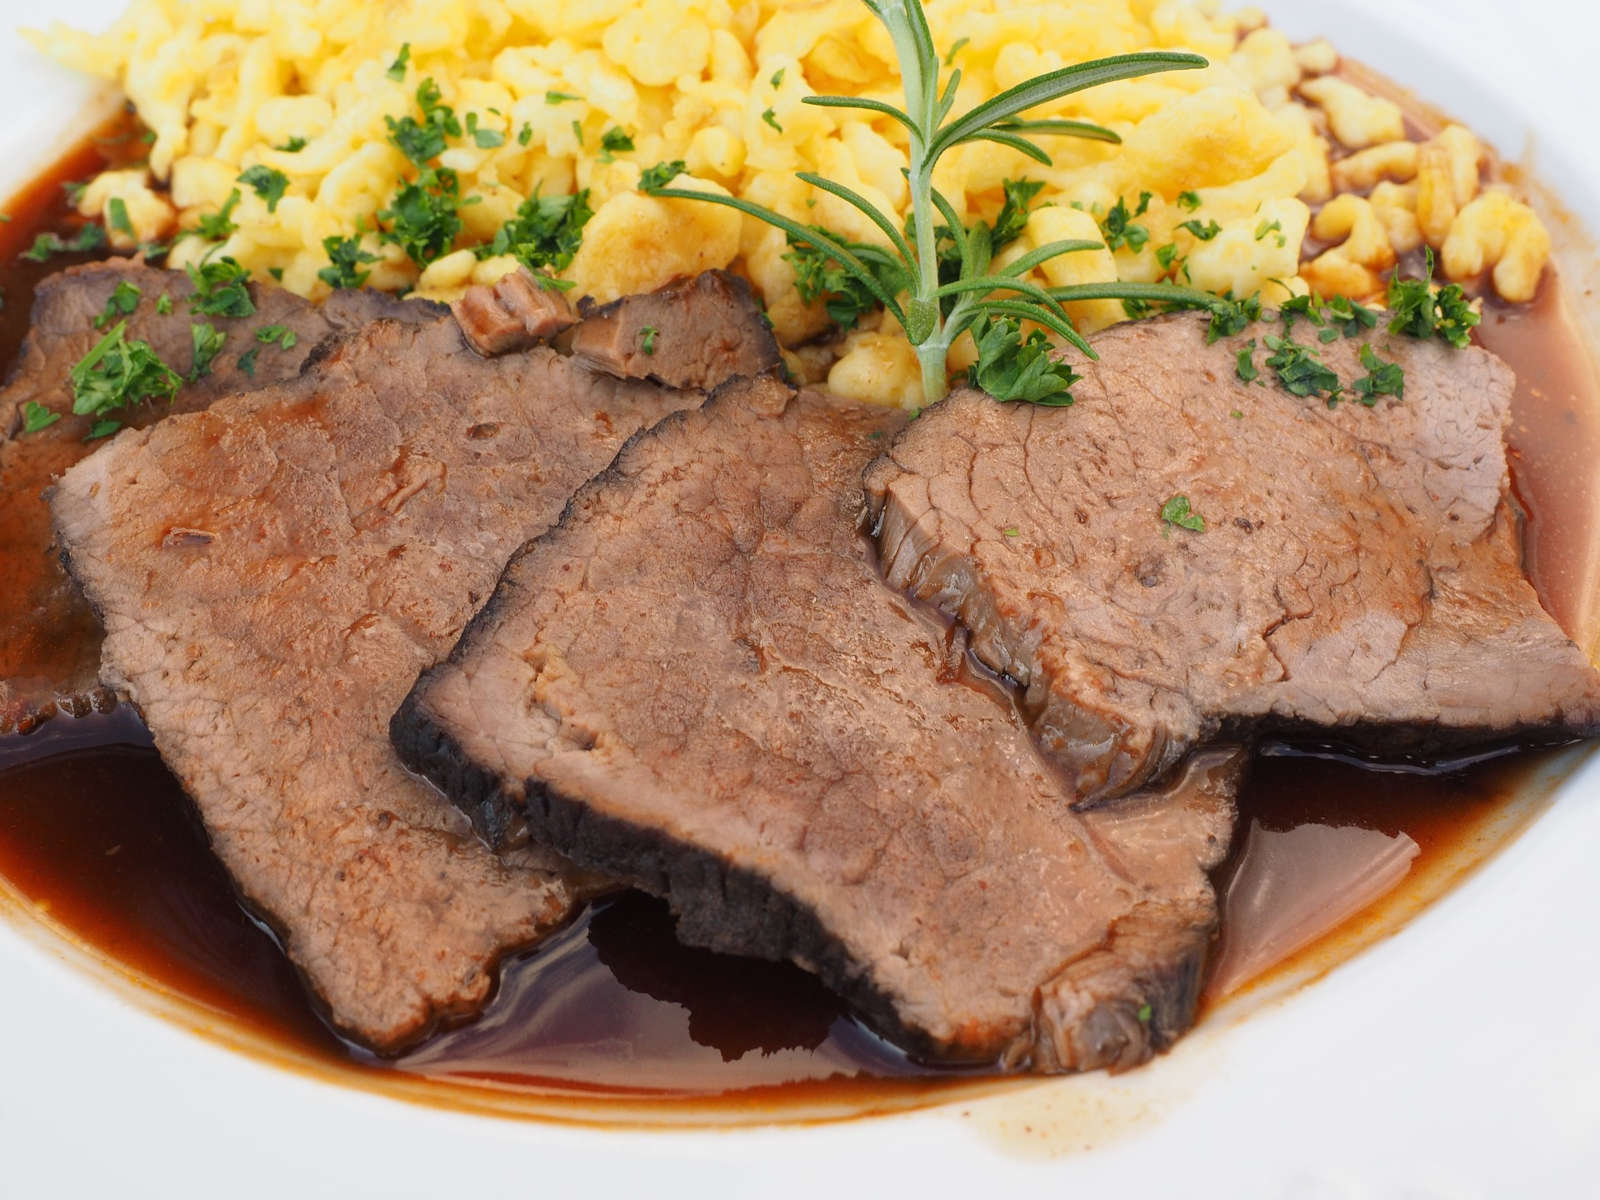 Top 10 German Foods with Recipes - What to Eat while in Germany